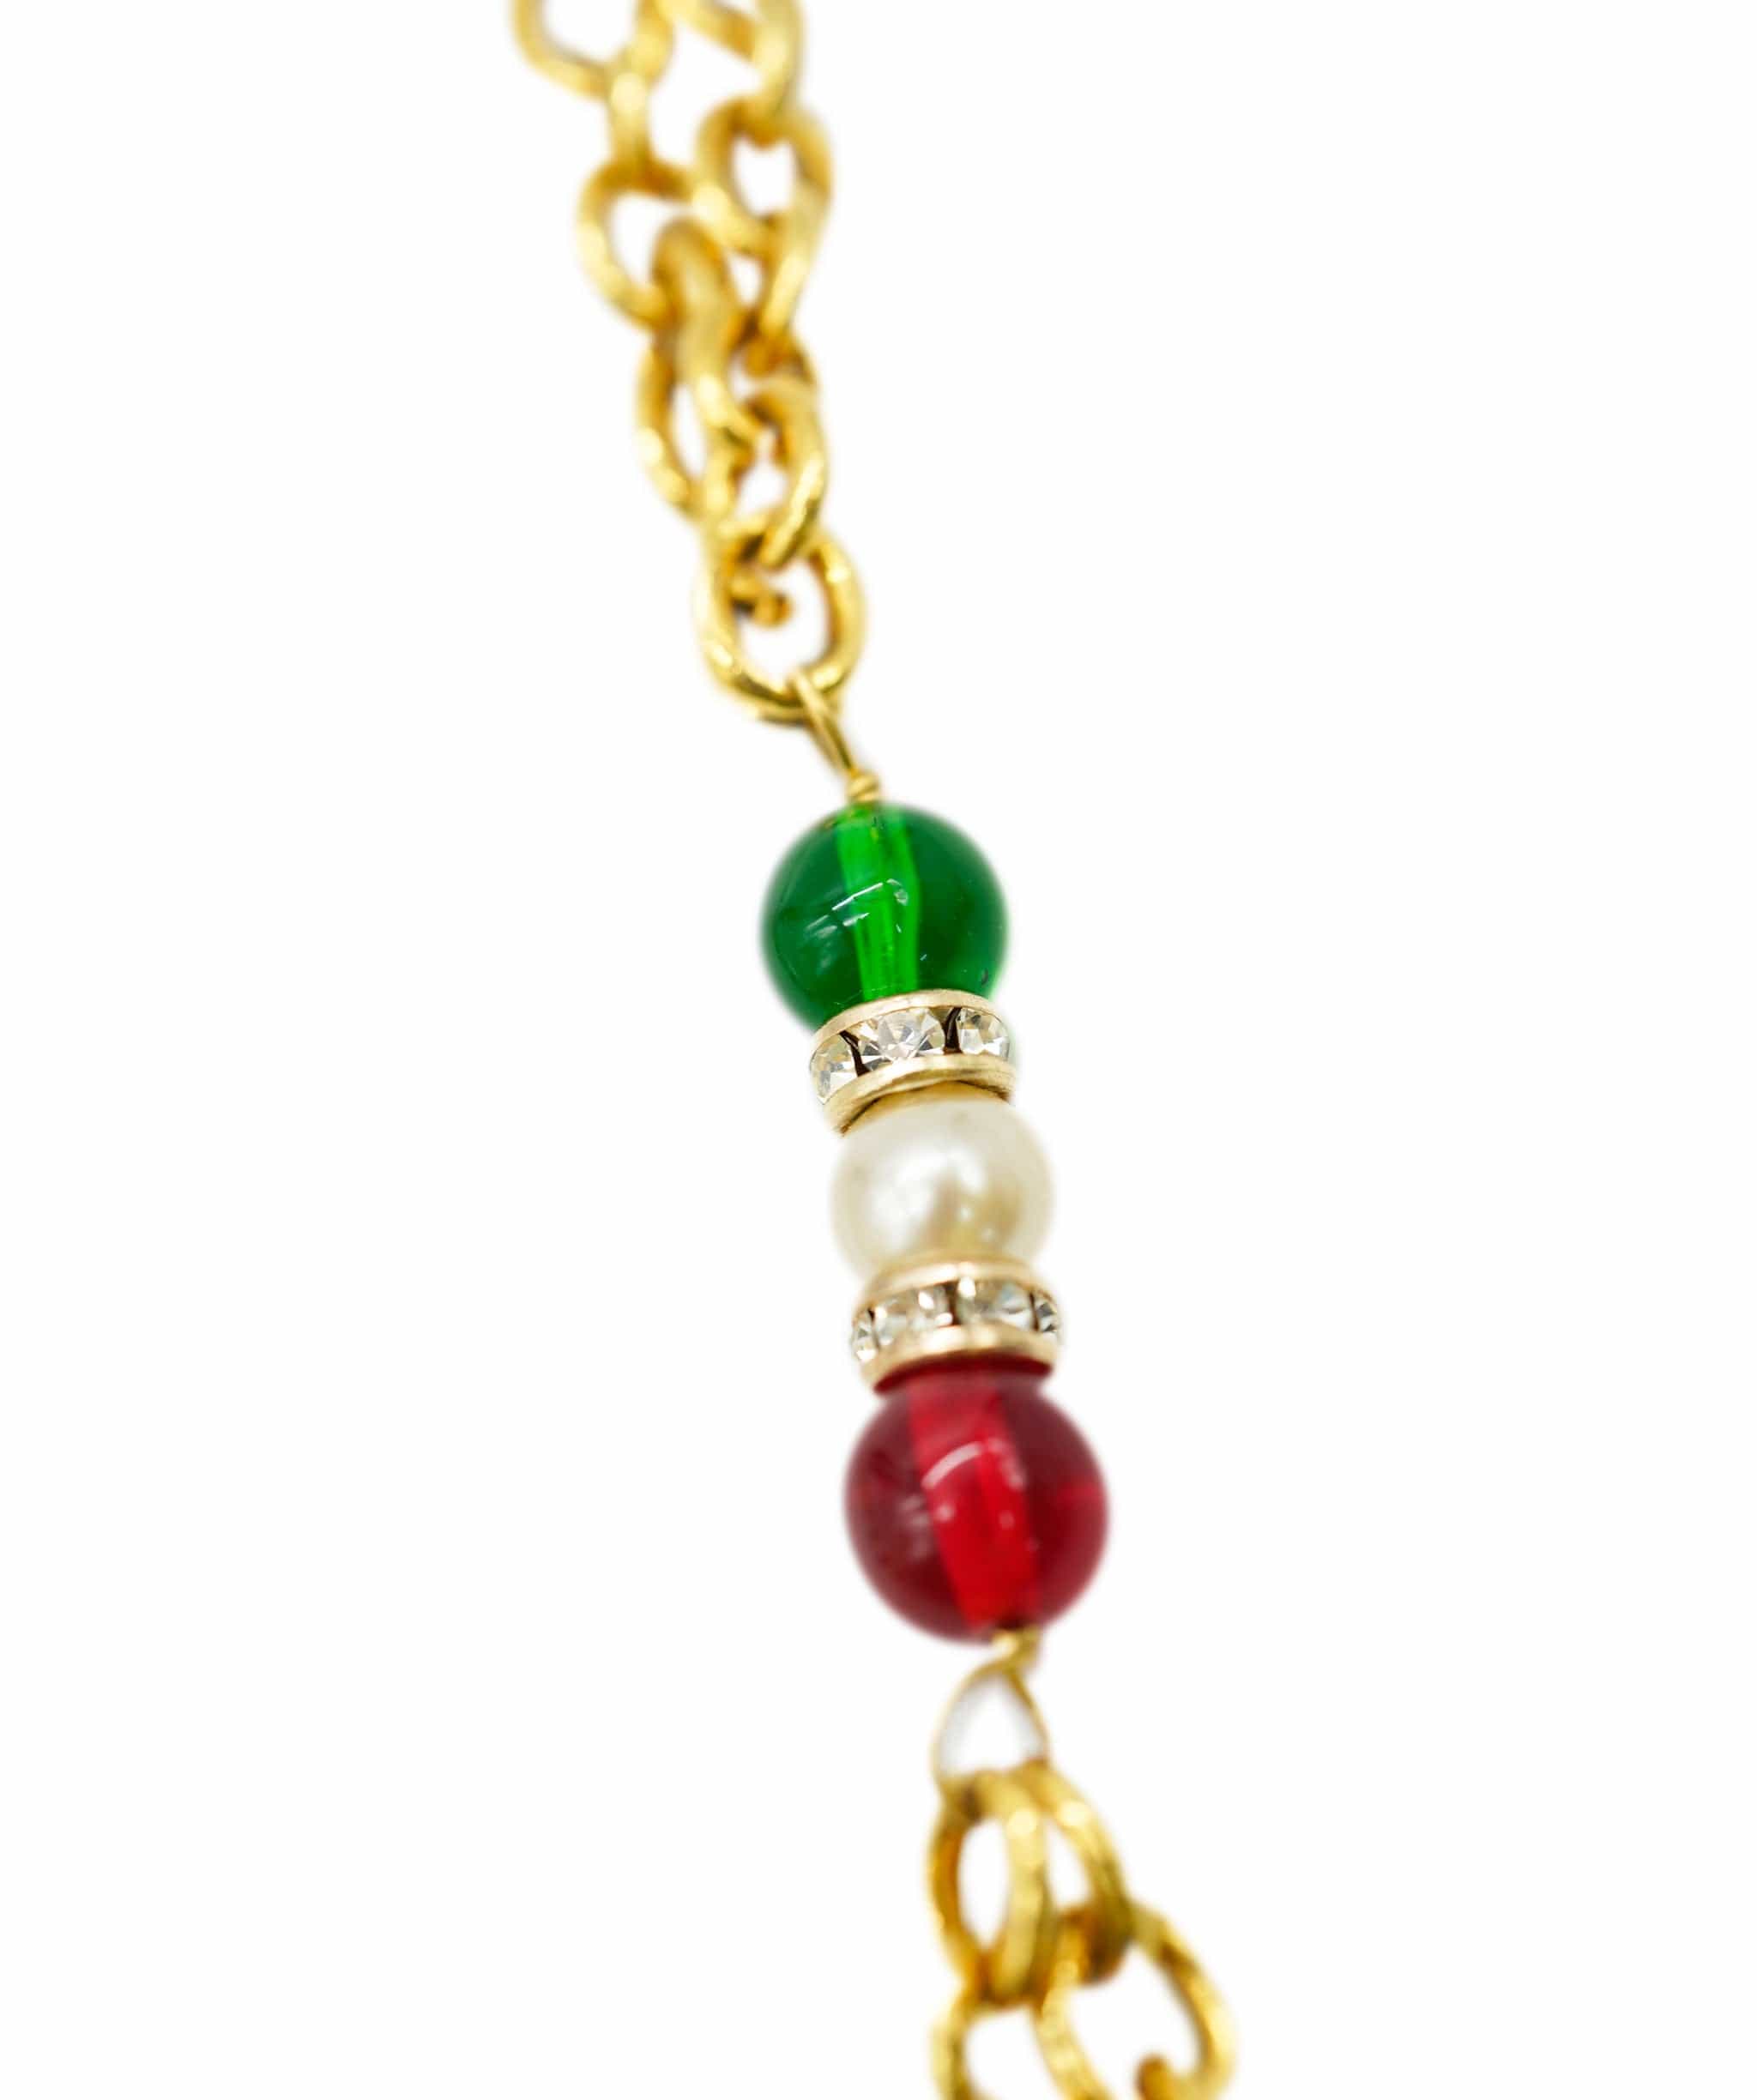 Chanel Chanel Red Green Gripoix Cross Necklace ASL4521 -Found in NYC Apartment